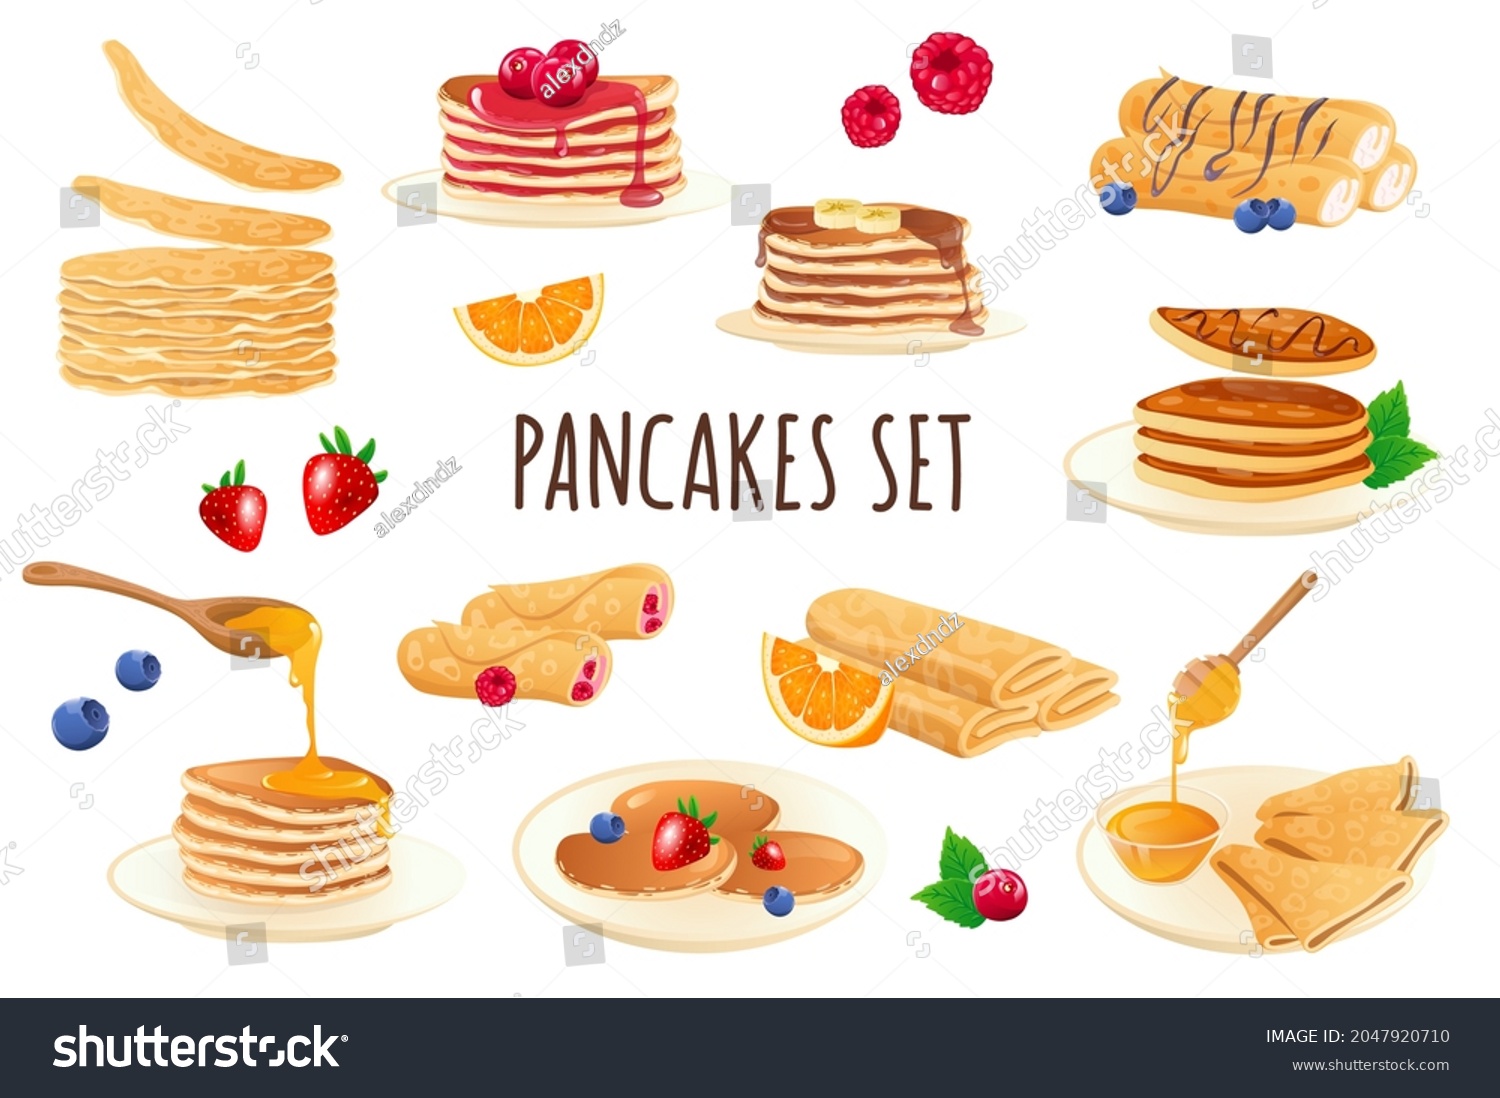 SVG of Pancakes icon set in realistic 3d design. Bundle of stacks of pancakes with different filling, berries, honey, chocolate and other. Cooking collection. Vector illustration isolated on white background svg